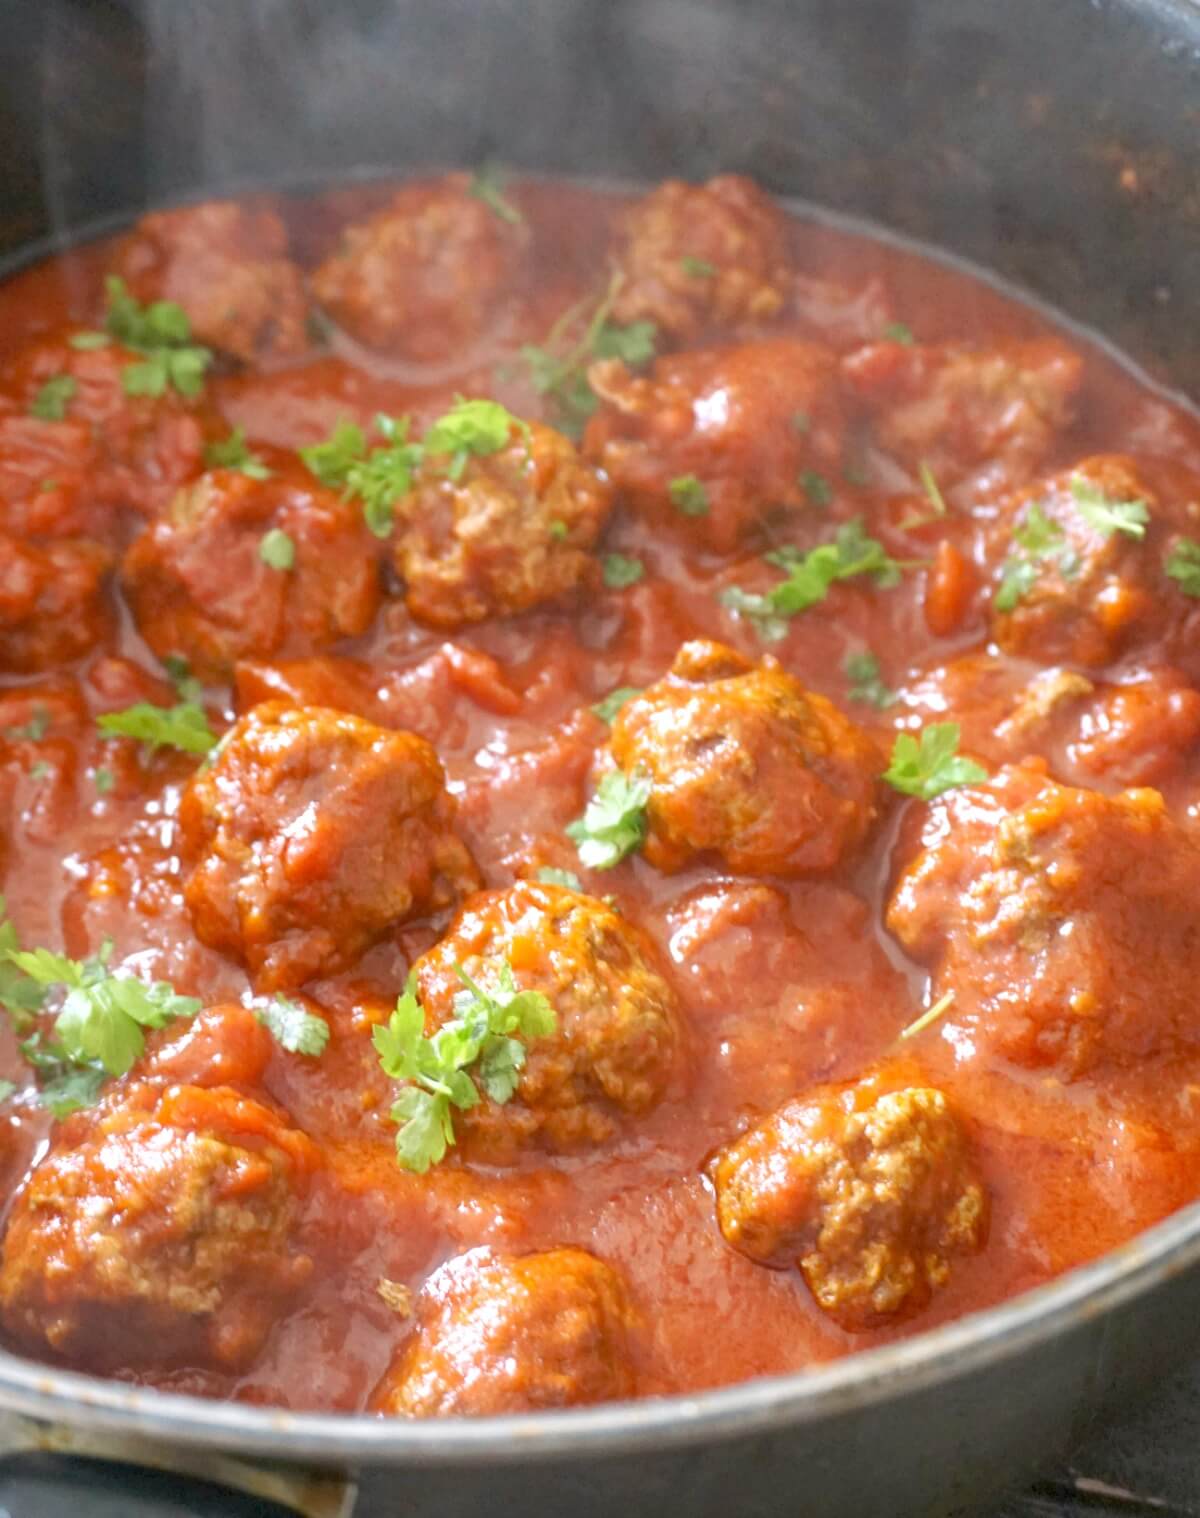 A pot with meatballs in tomato sauce garnished with chopped parsley.